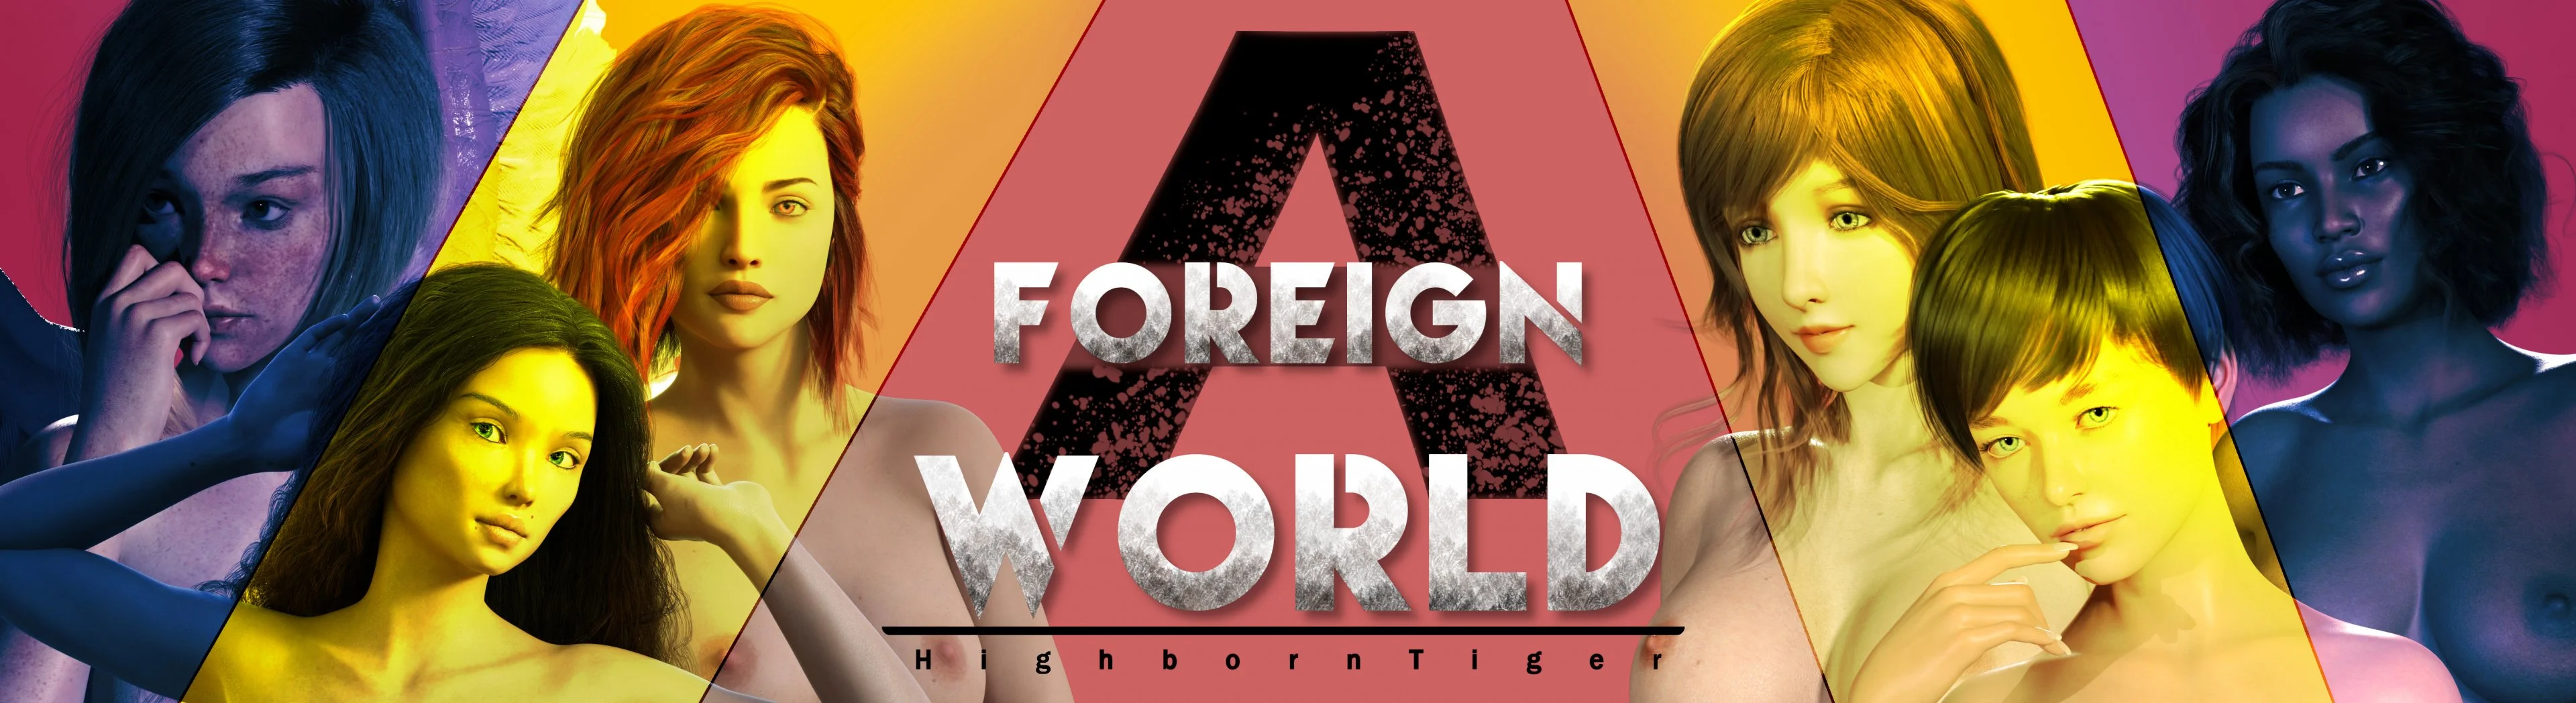 A Foreign World main image